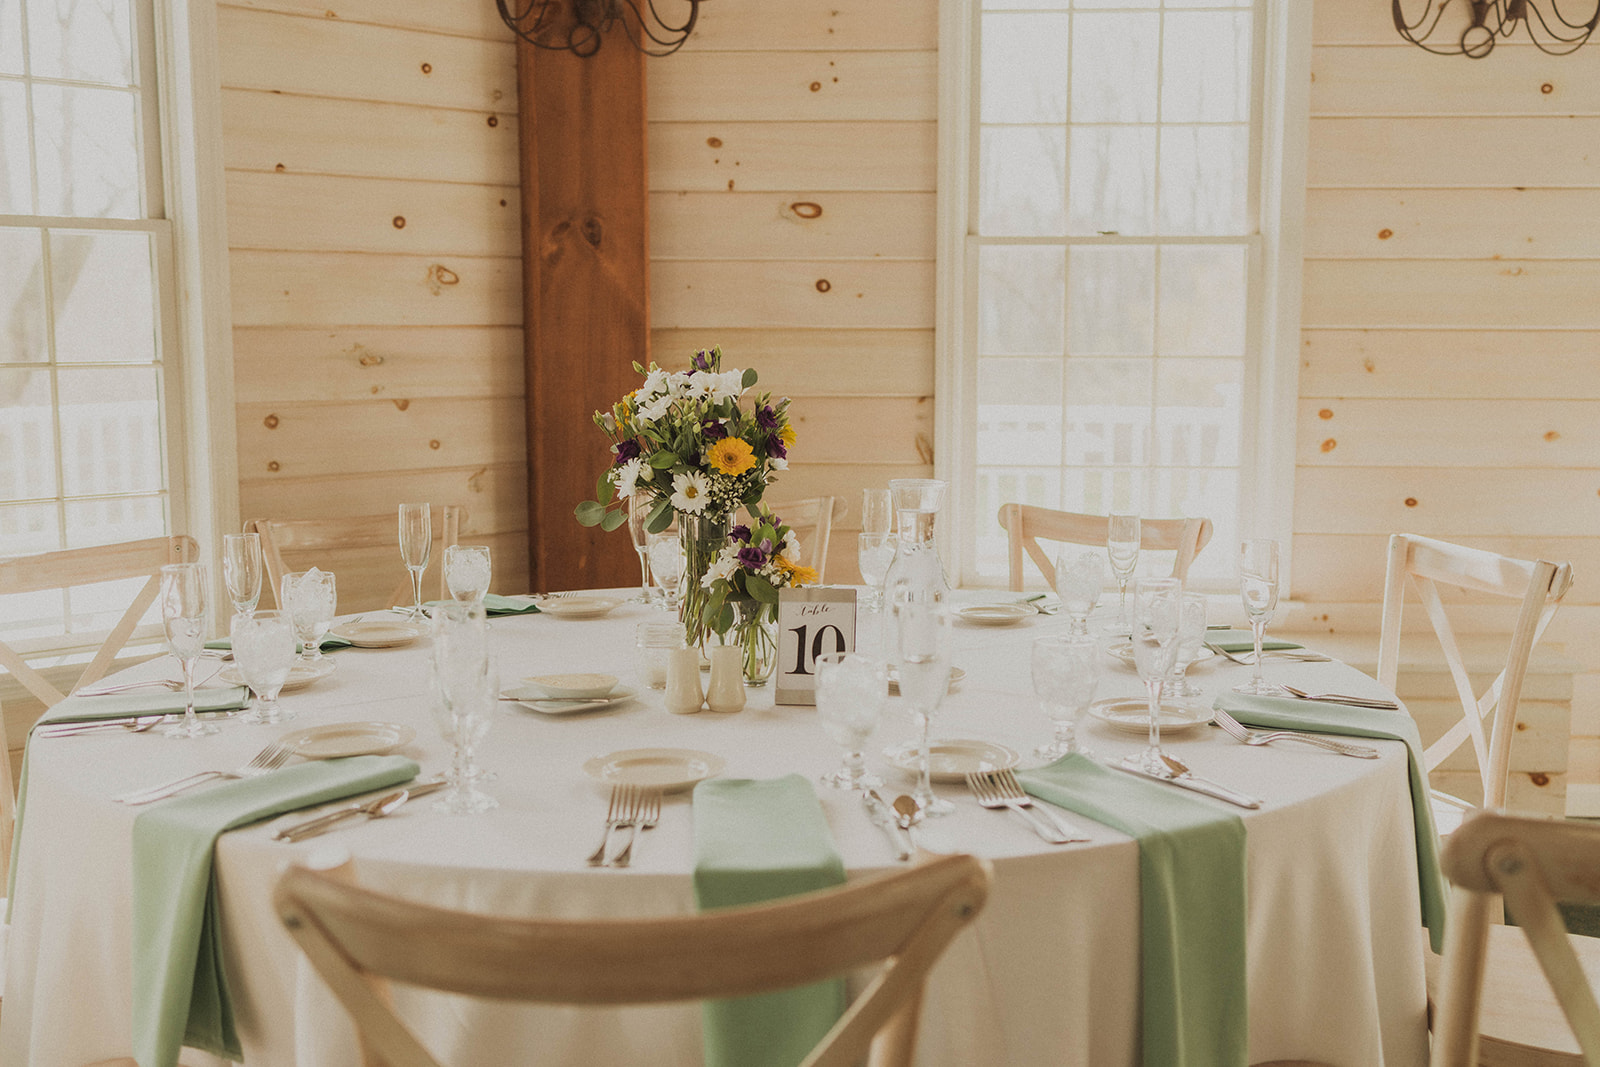 Dreamy upstate New York wedding venue set up and ready for the reception